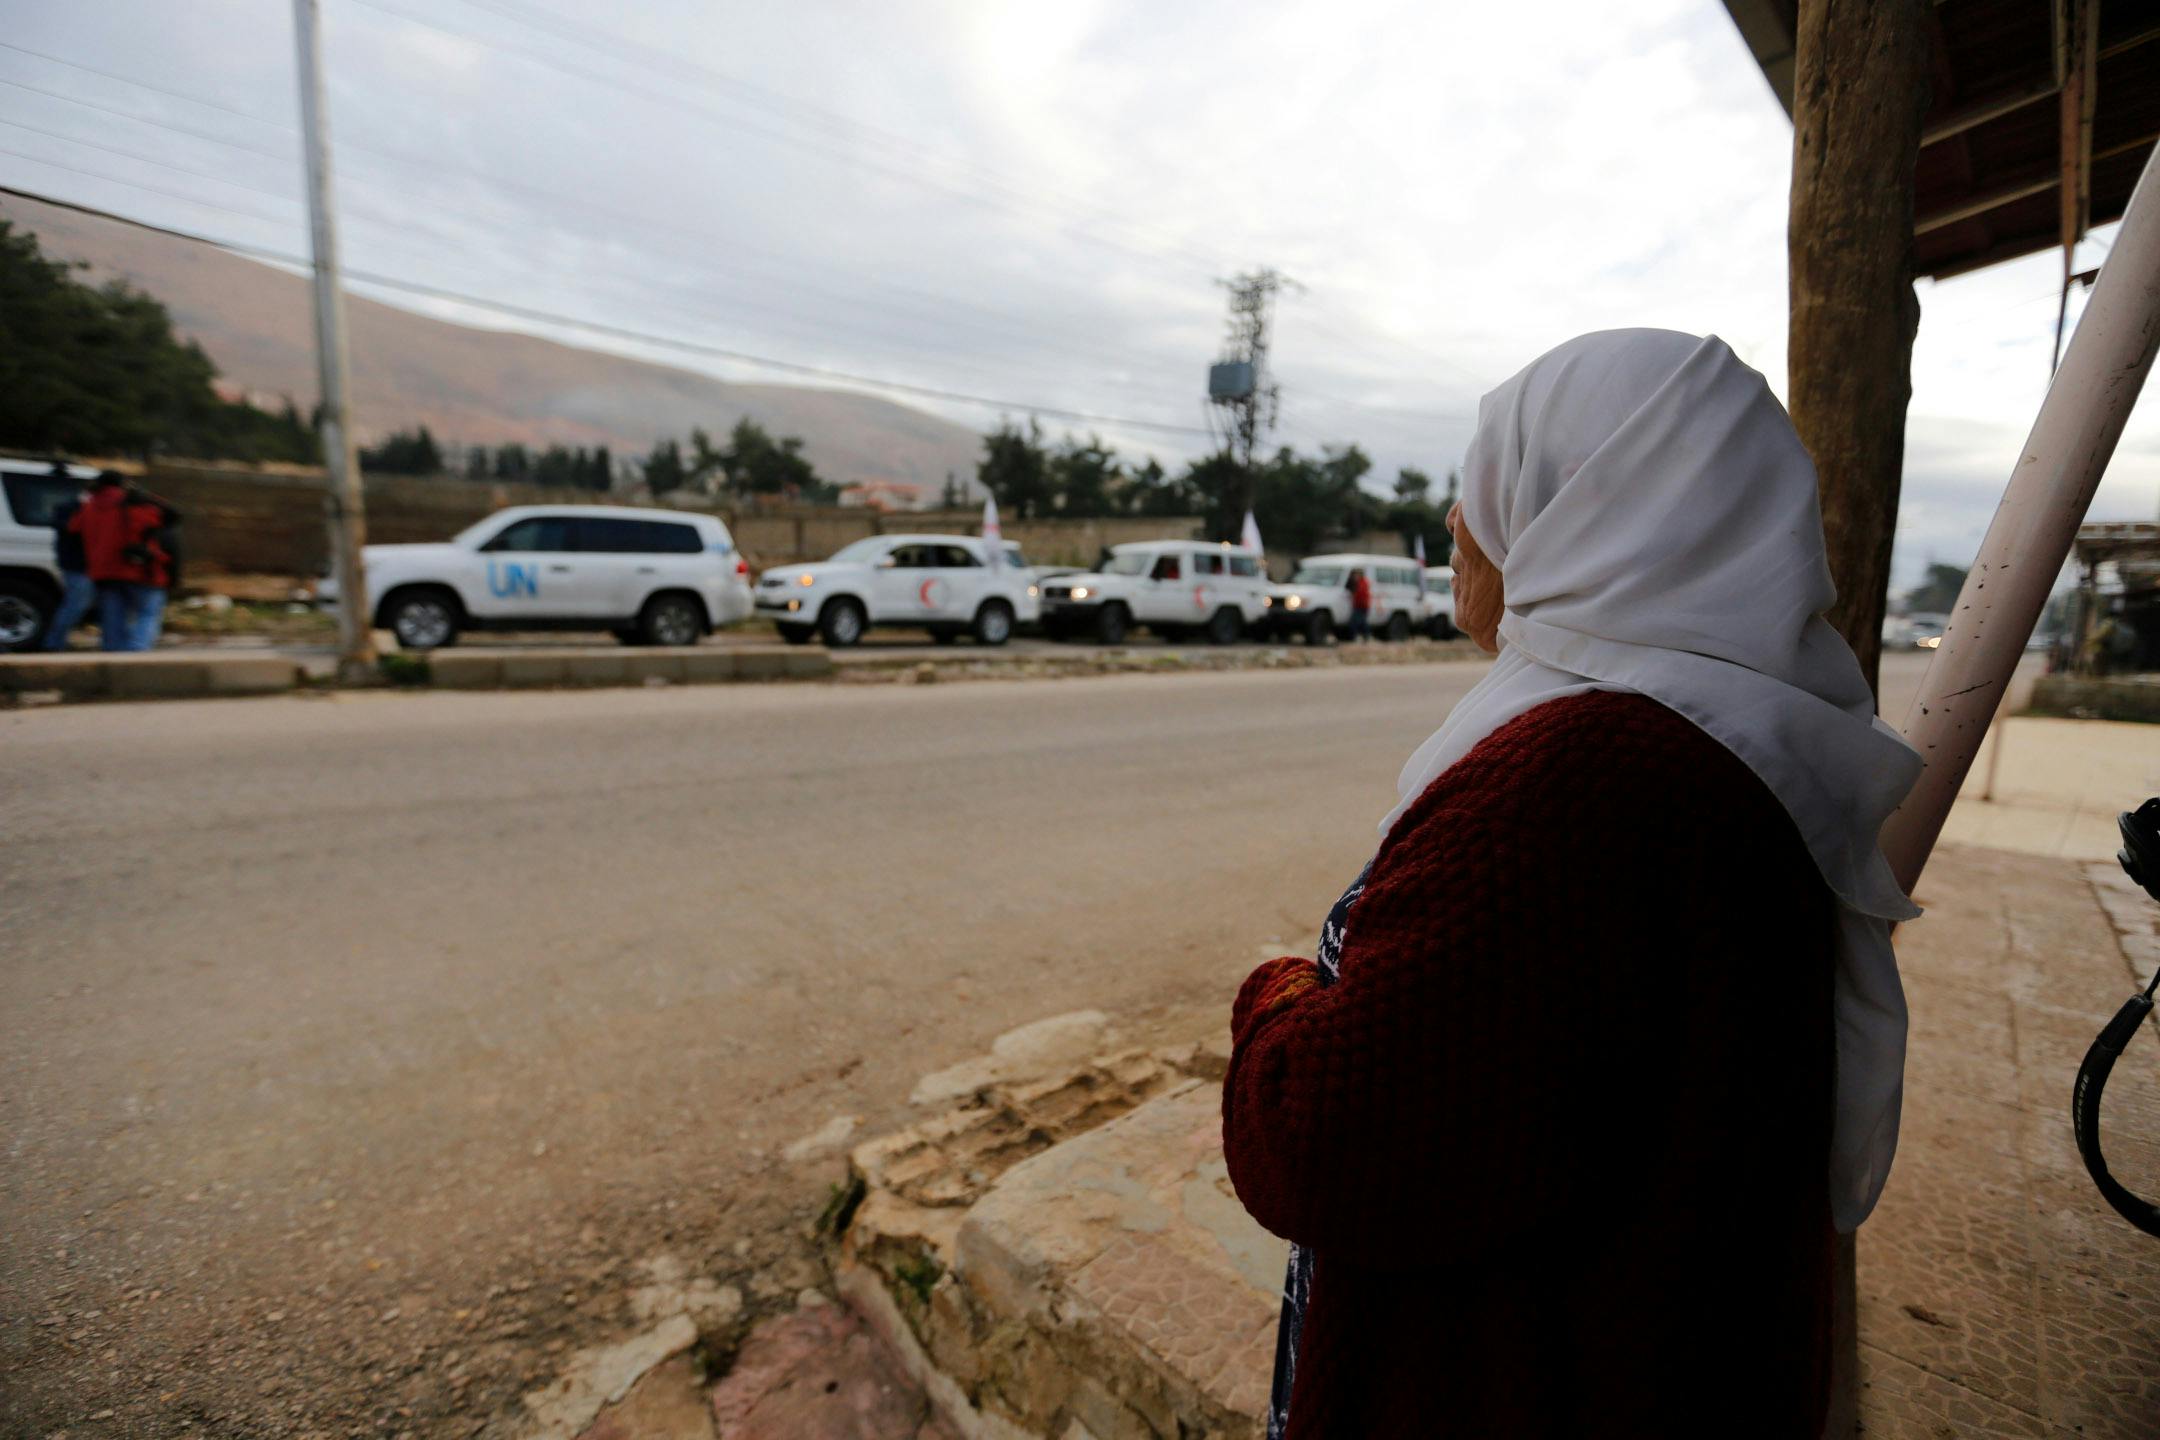 A woman watching United Nations vehicles, as part of a humanitarian convoy.